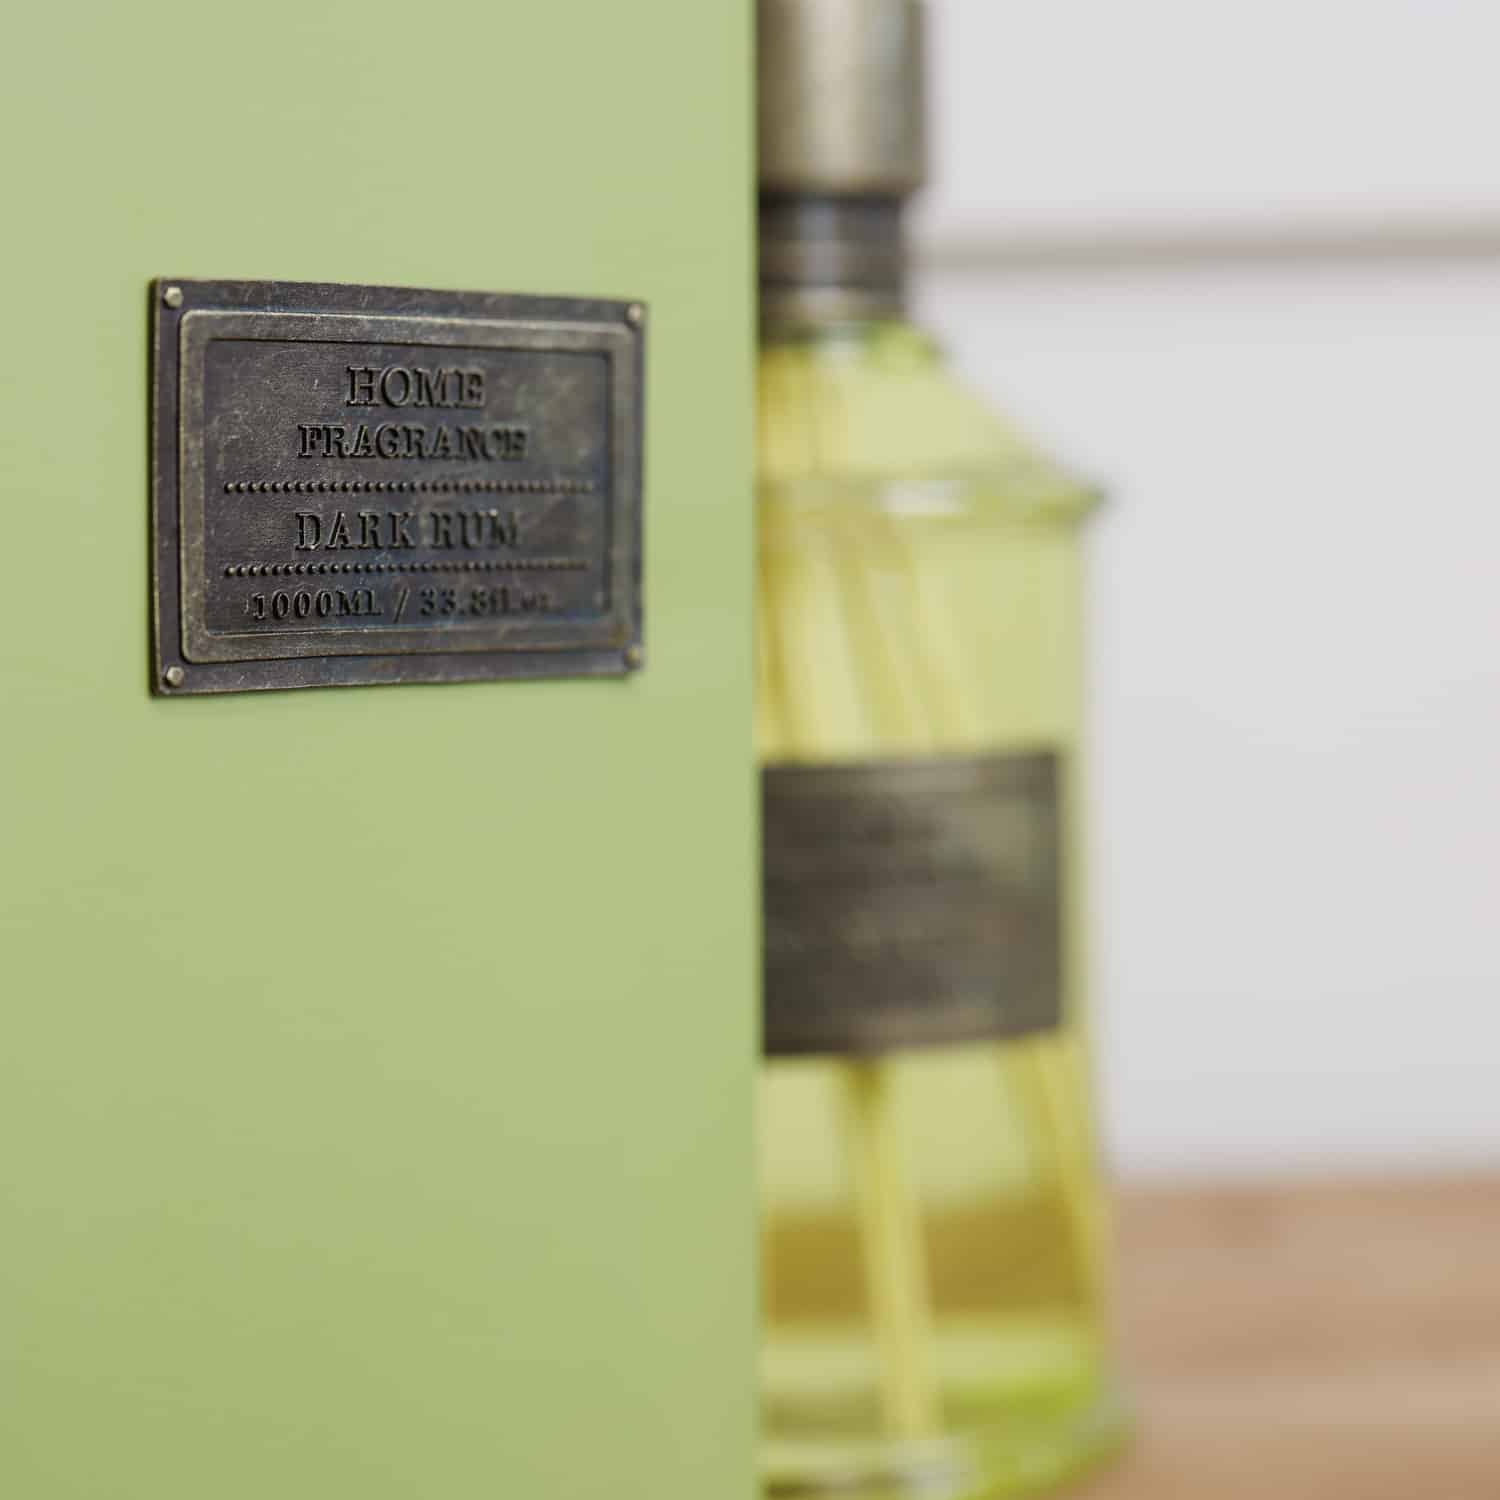 Home fragrance dark rum and lime green reed diffuser presentation box close up